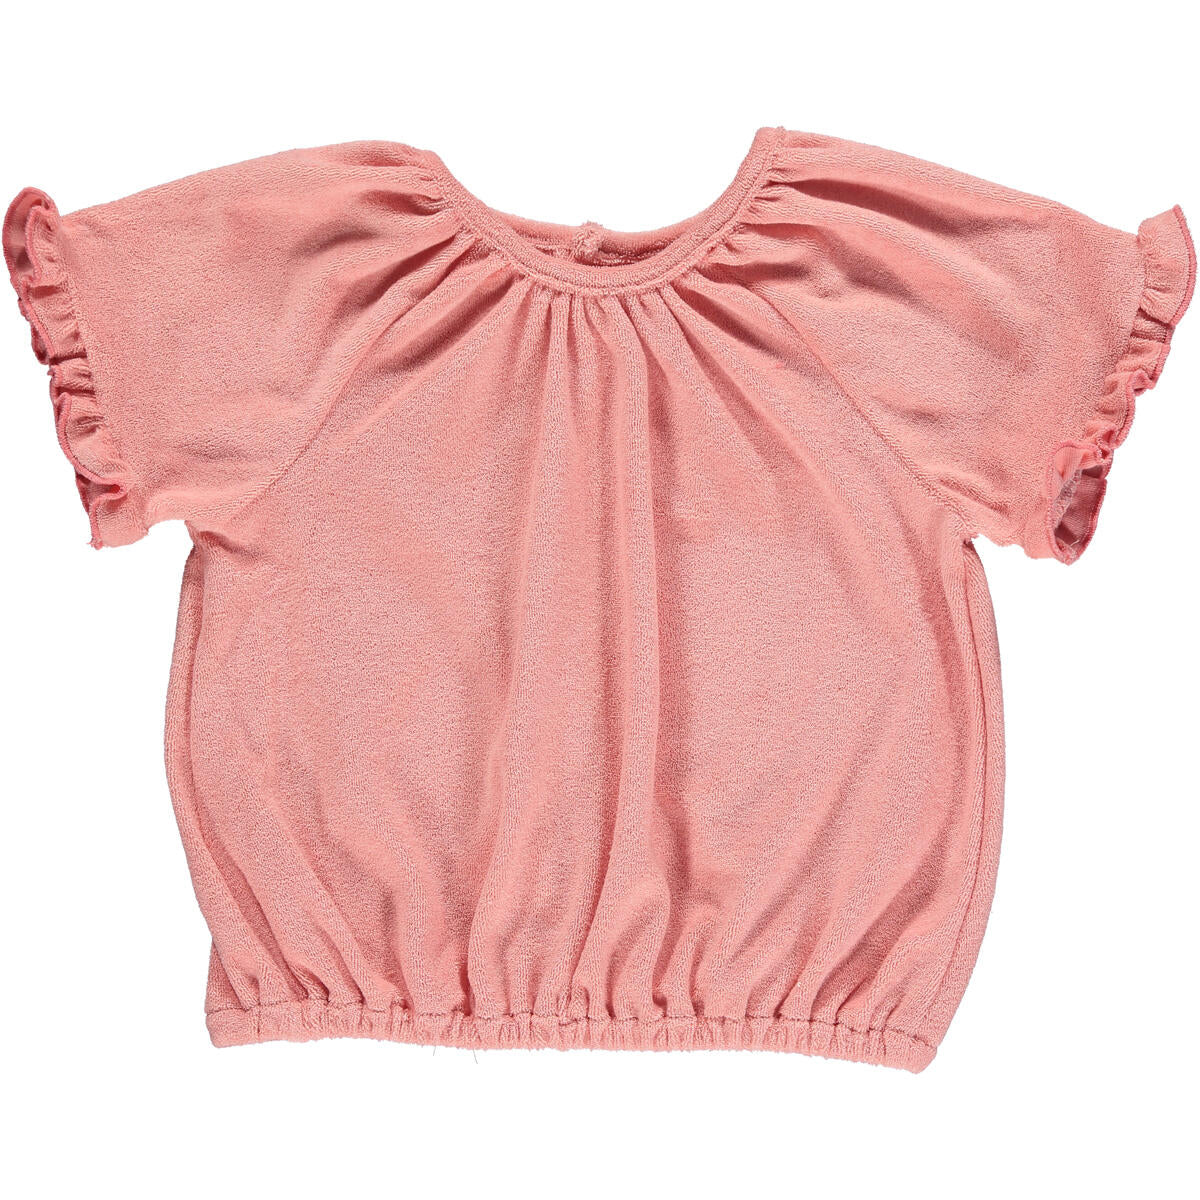 Shannon Top - Pink